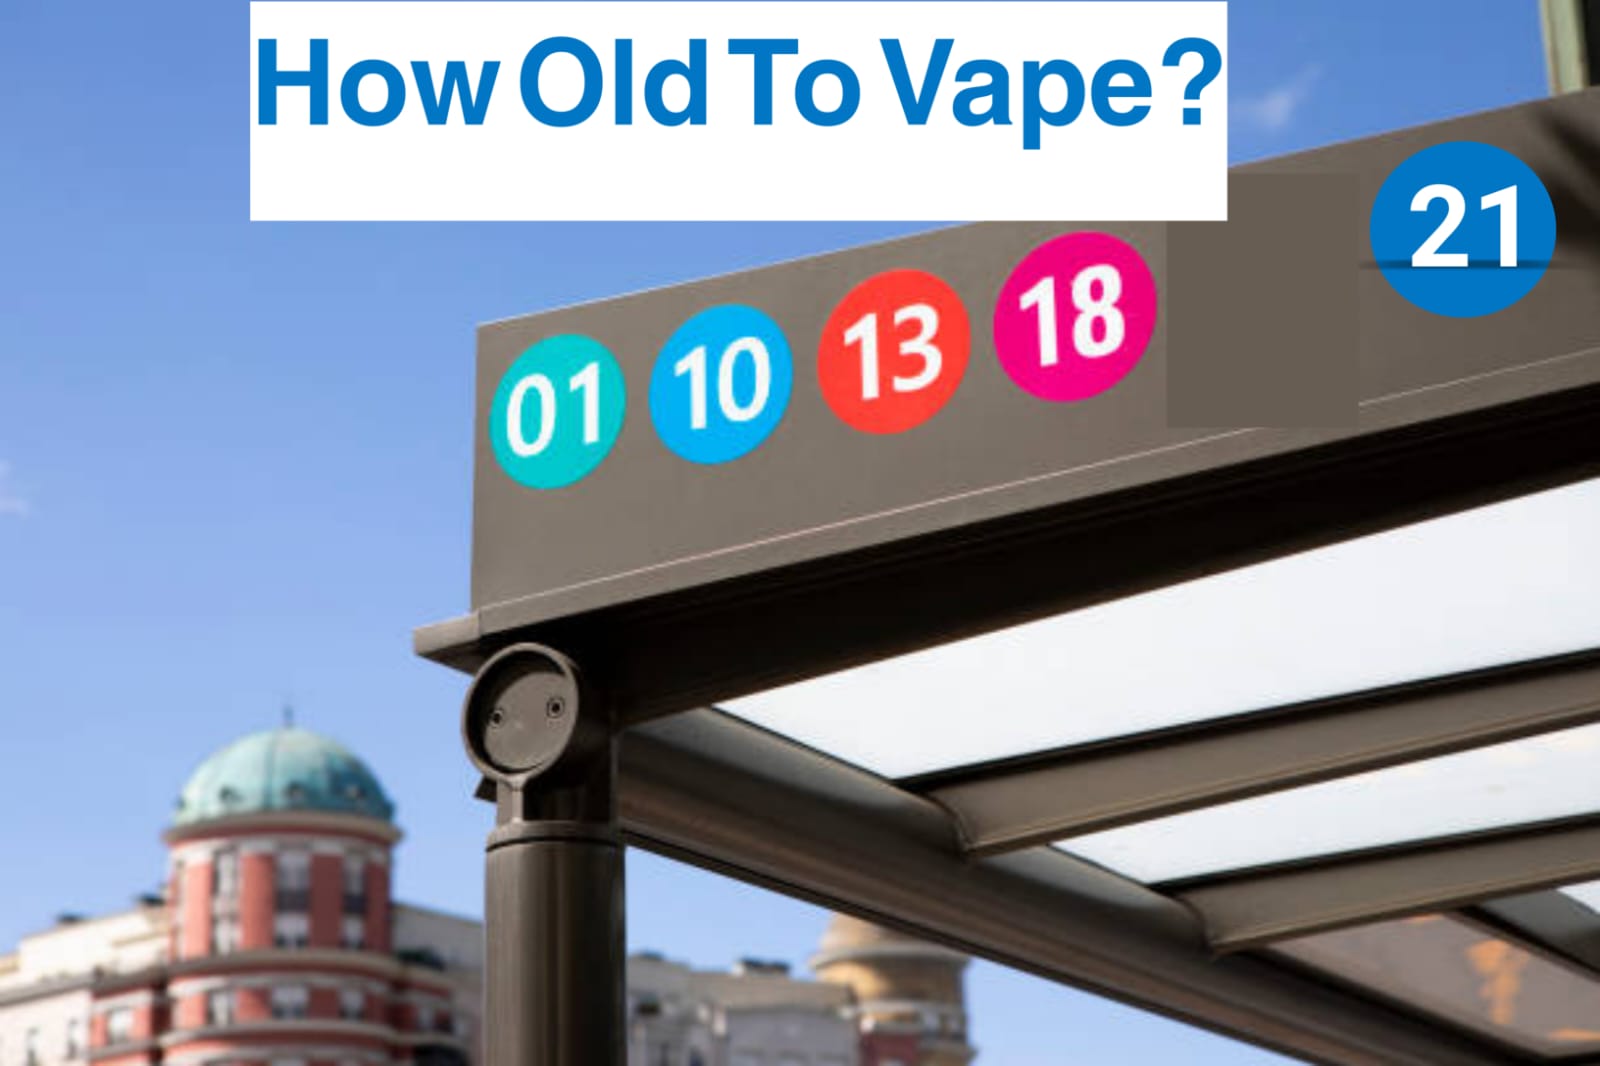 How old should one be to vape legally in the UK